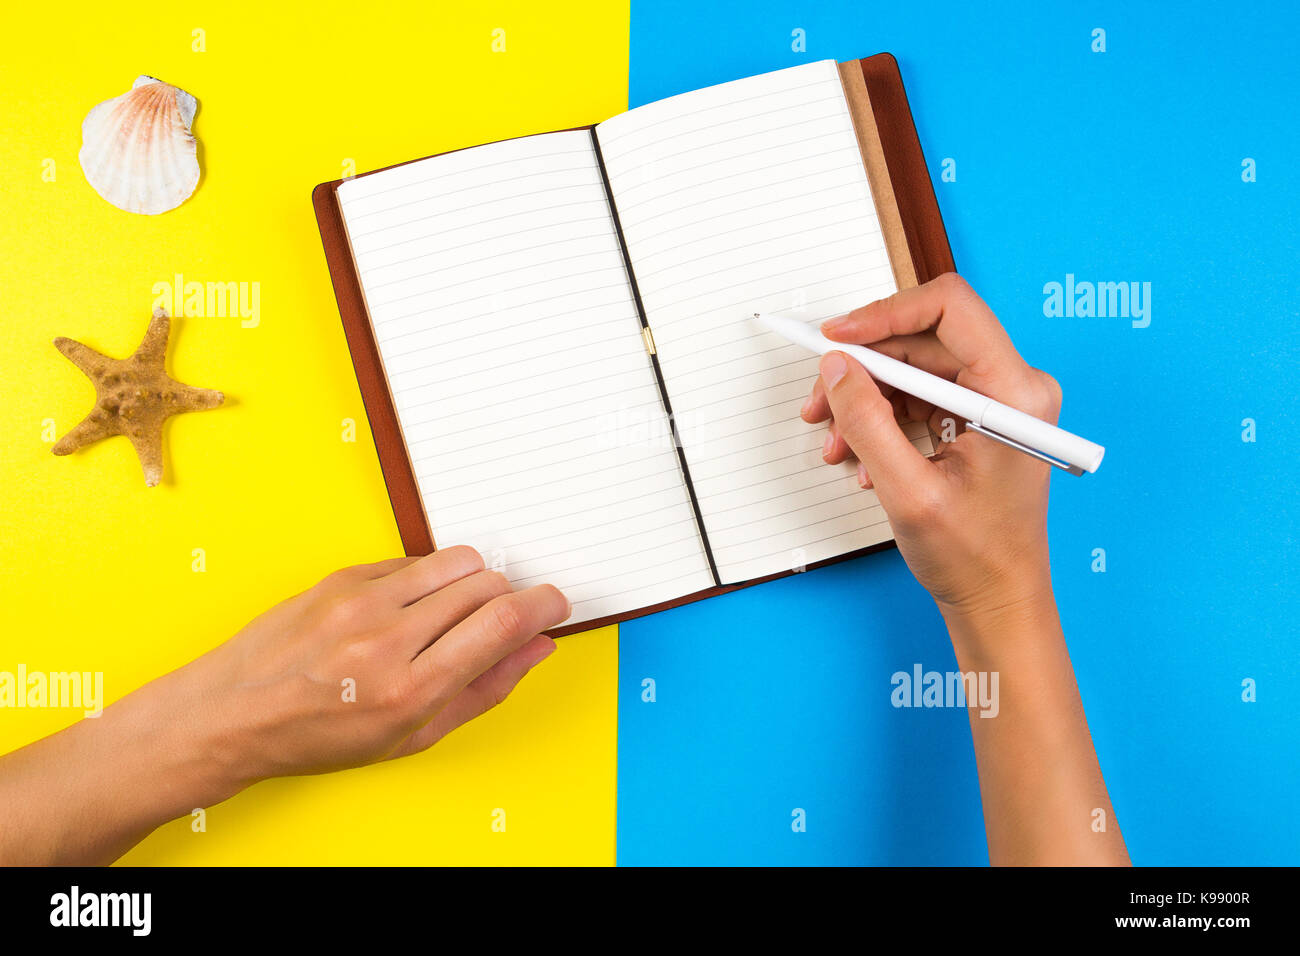 Travel, vacation, summer concept. Woman hand writing in notebook over blue and yellow background Stock Photo